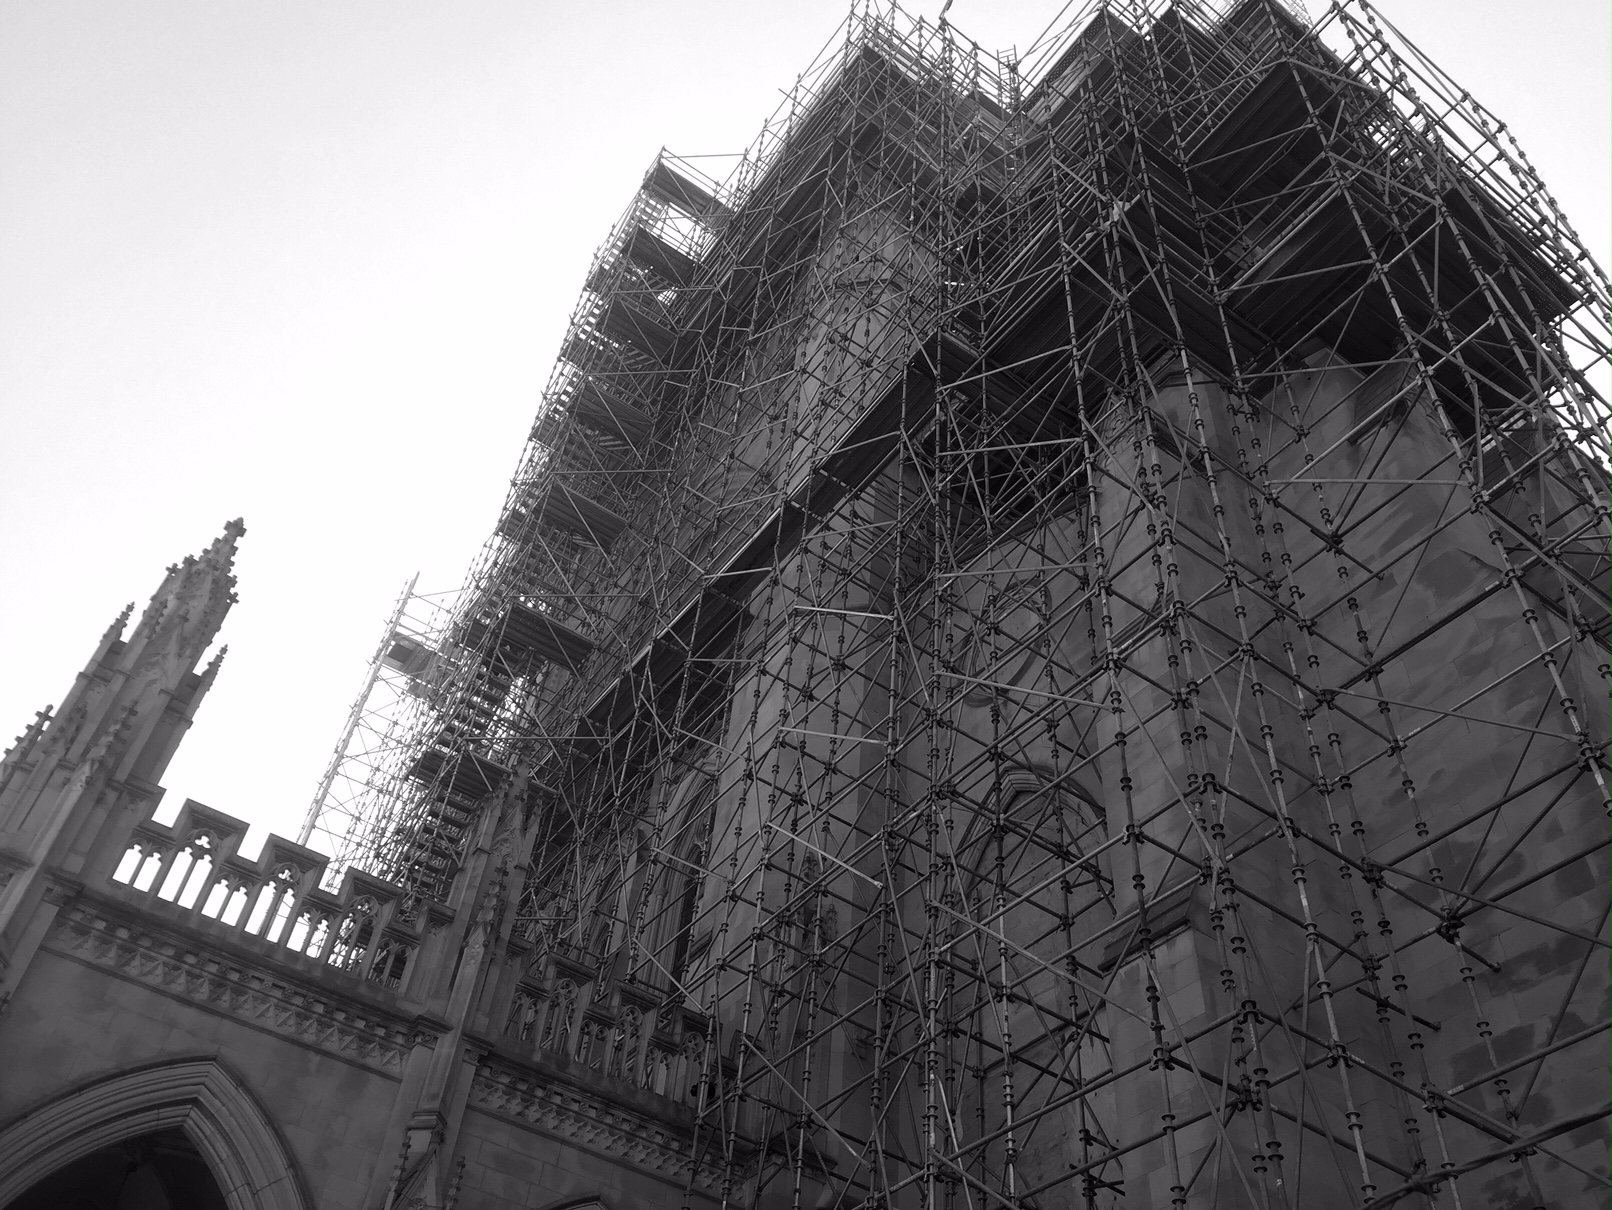 As a religious organization, the National Cathedral relies on private donations, but needs $20 million to complete the restoration. (WTOP/Neal Augenstein)